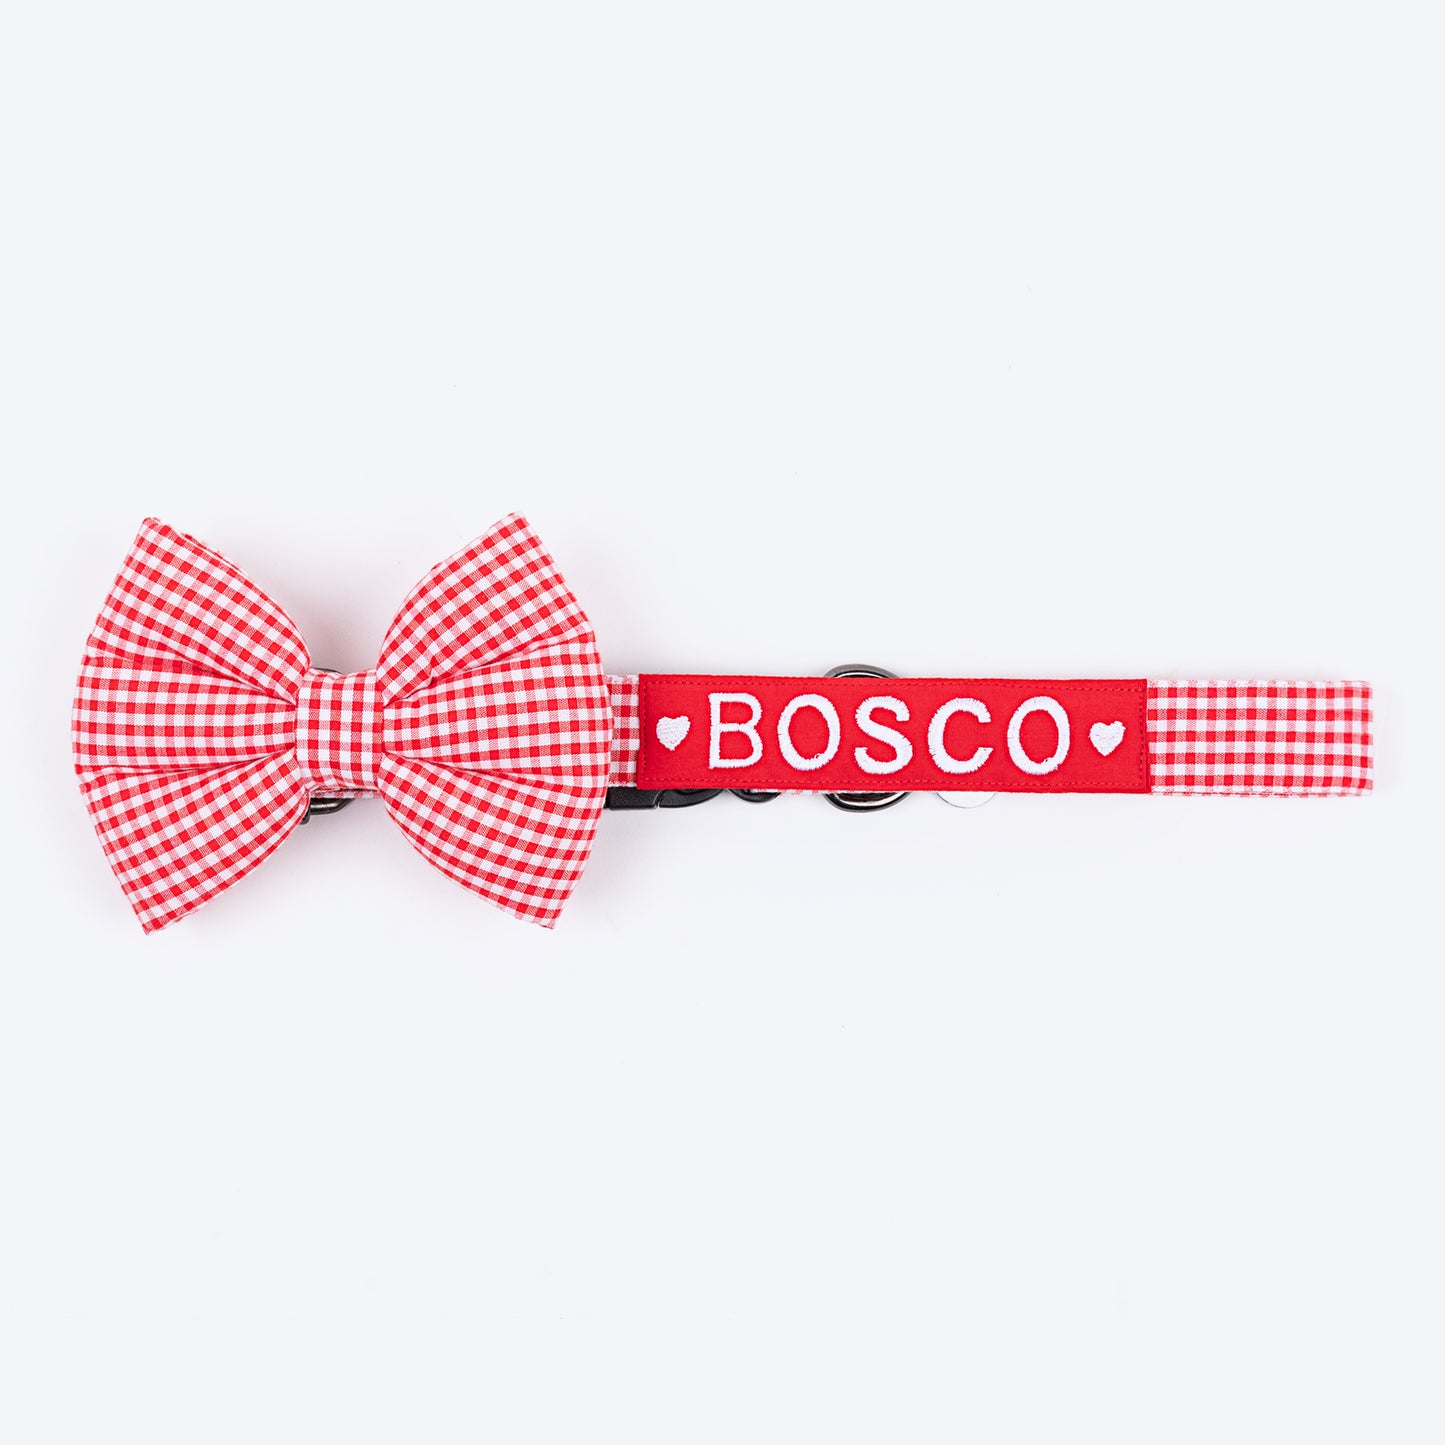 HUFT Personalised Gingham Fabric Collar With Bow Tie For Dogs - Red - Heads Up For Tails